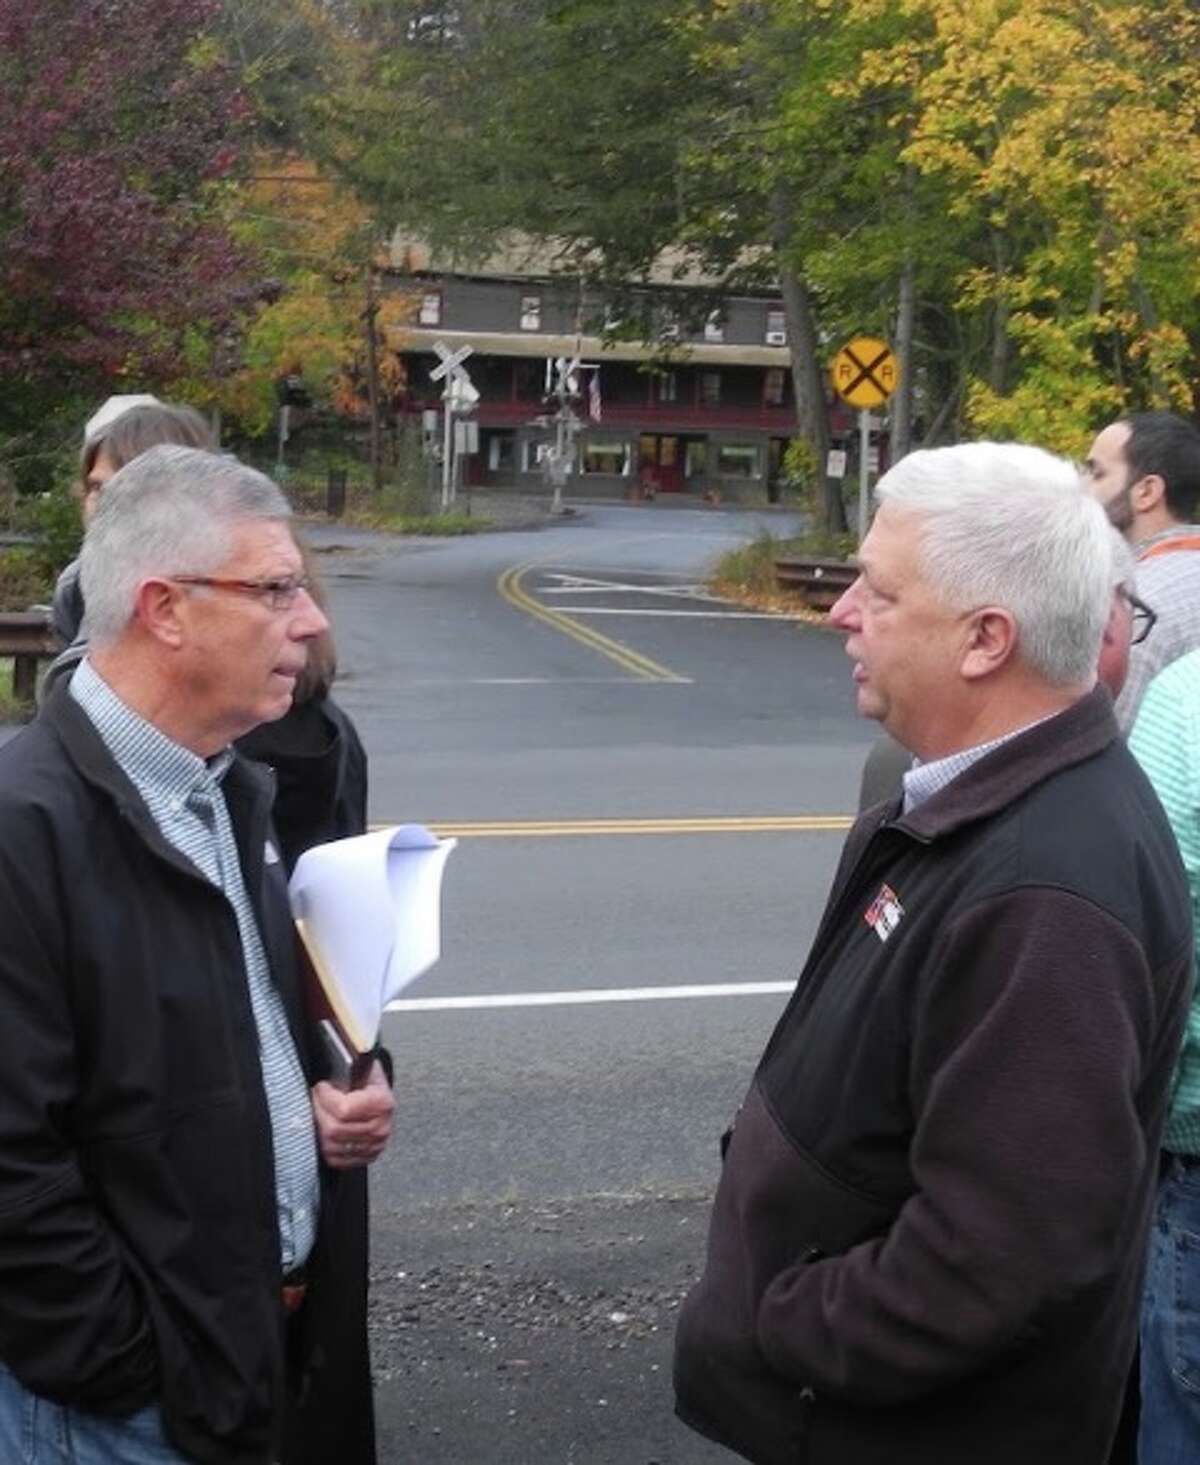 Recently retired town engineer Charlie Fisher, right, spoke with Selectman Bob Hebert in the fall of 2017, when town officials met area property owners to discuss the Branchville revitalization plan Fisher had put together. — Macklin Reid photo